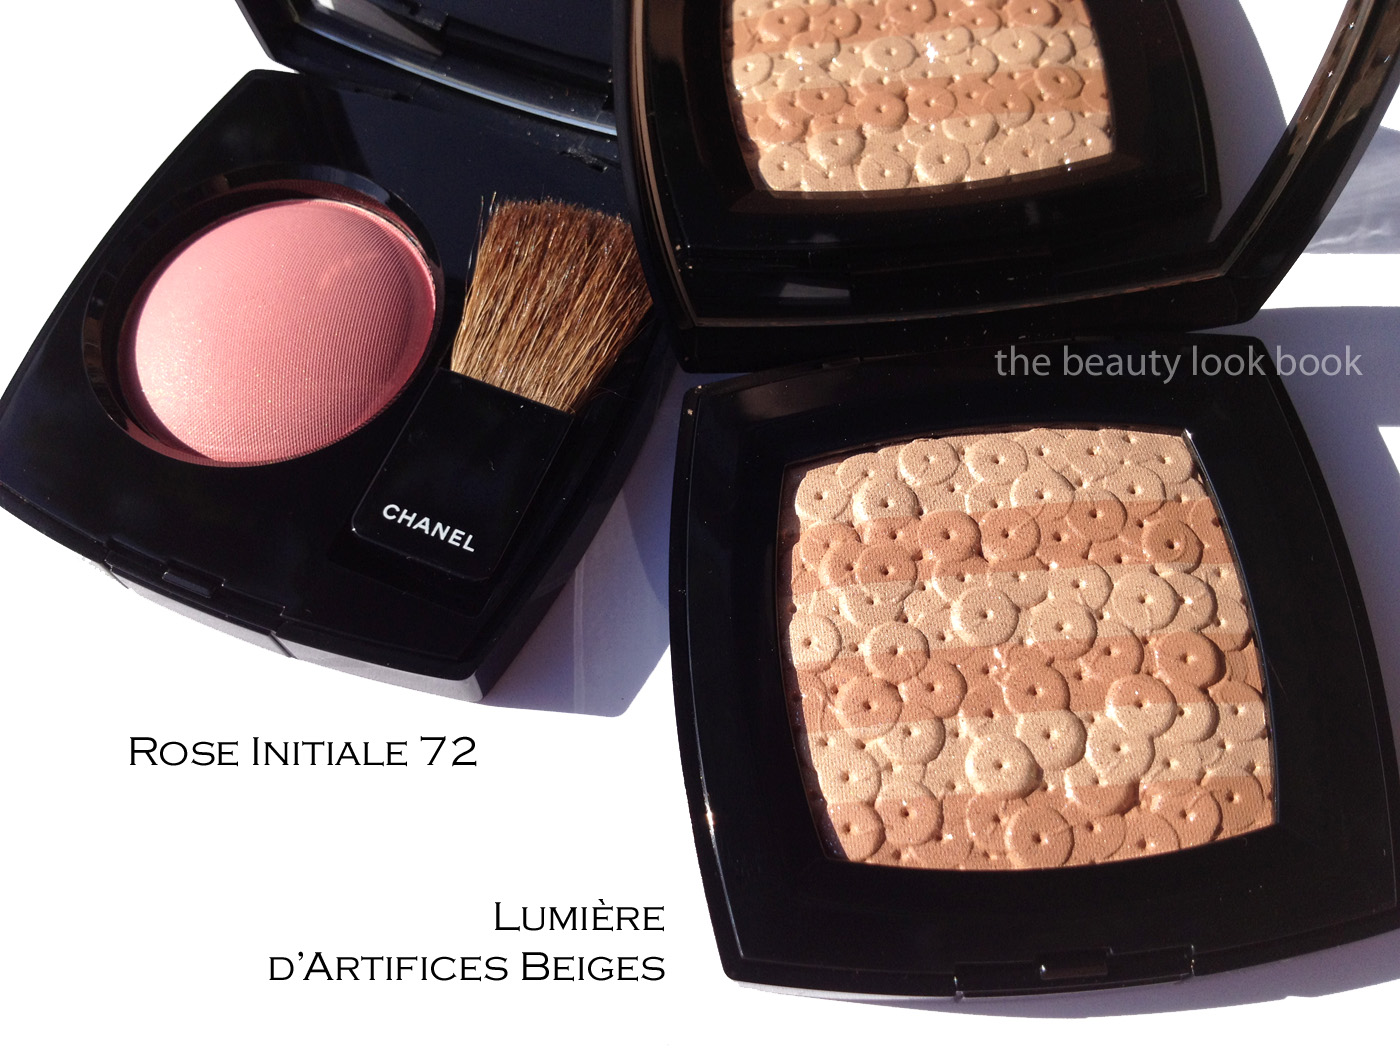 Uncategorized Archives - Page 109 of 224 - The Beauty Look Book